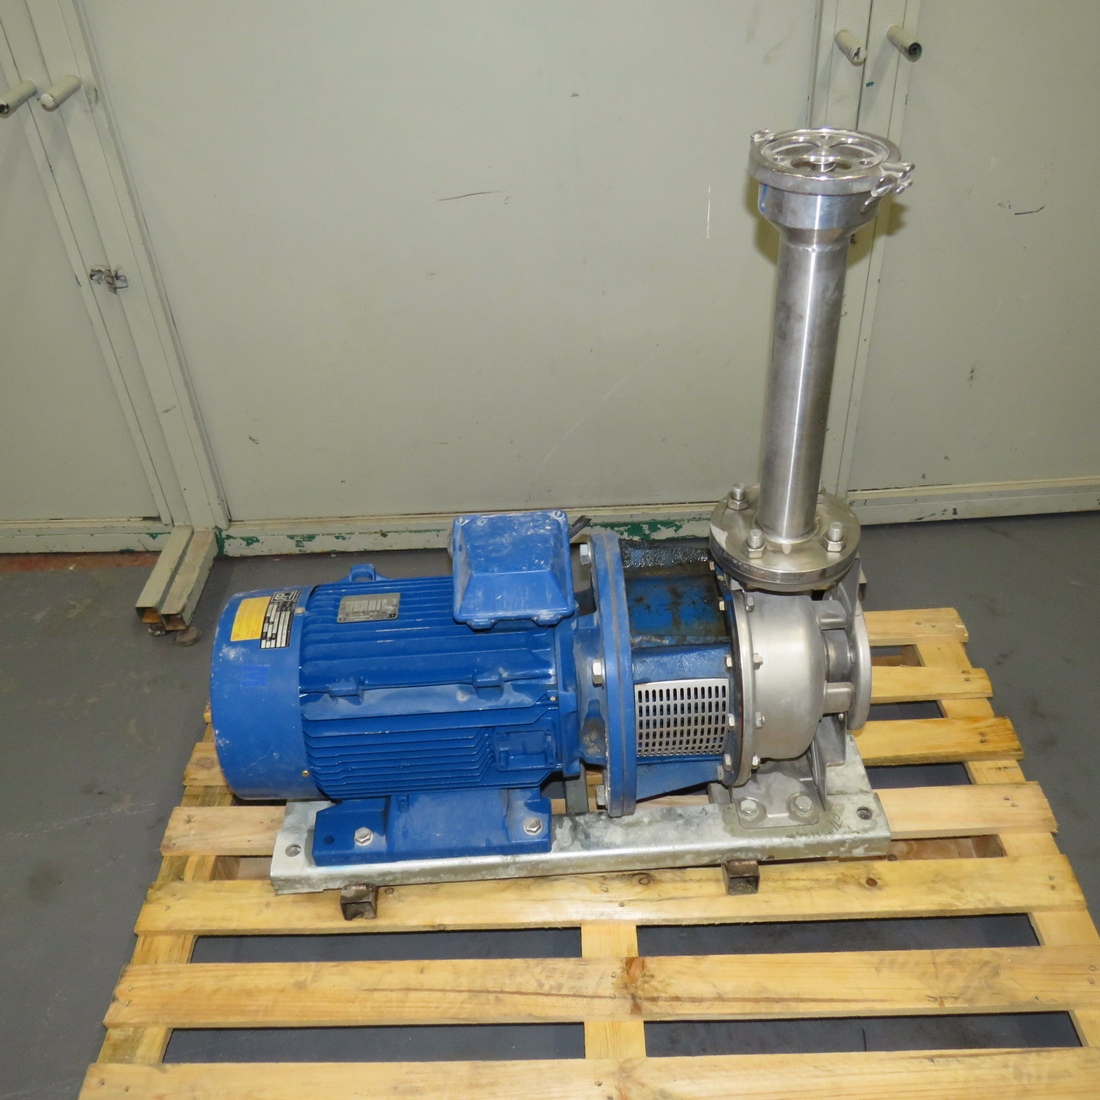 Hp 15 - Hilge Stainless Steel Centrifugal Pump - Type Durachrom 65-50-200